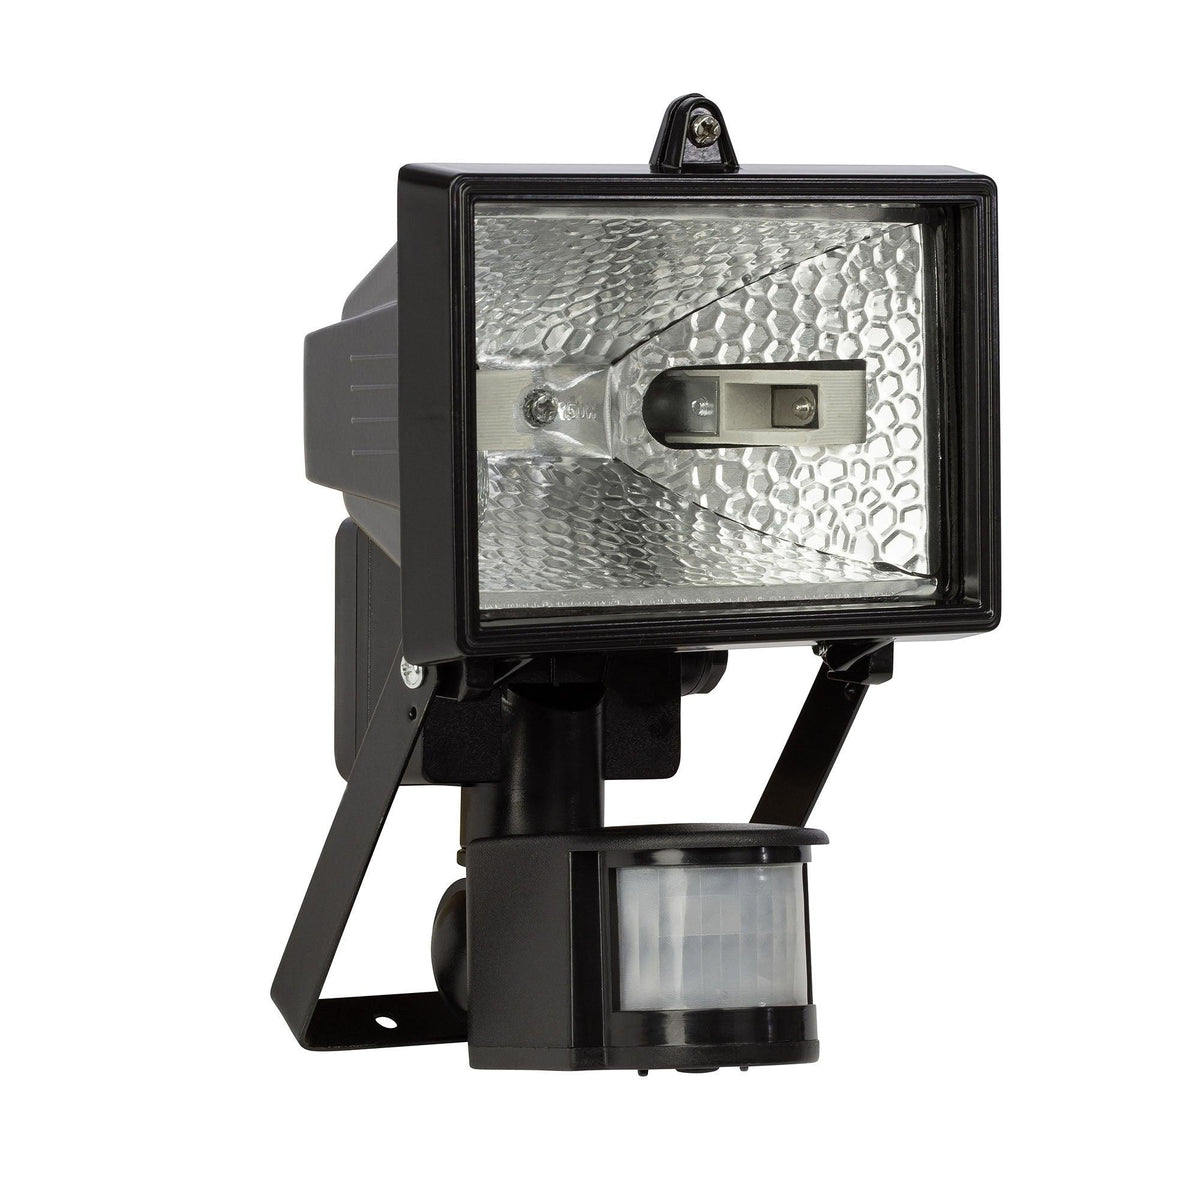 Brilliant 1 Light 150W Tanko Outdoor Wall Floodlight with Motion Detector - Black | 96162/06 from DID Electrical - guaranteed Irish, guaranteed quality service. (6977600192700)